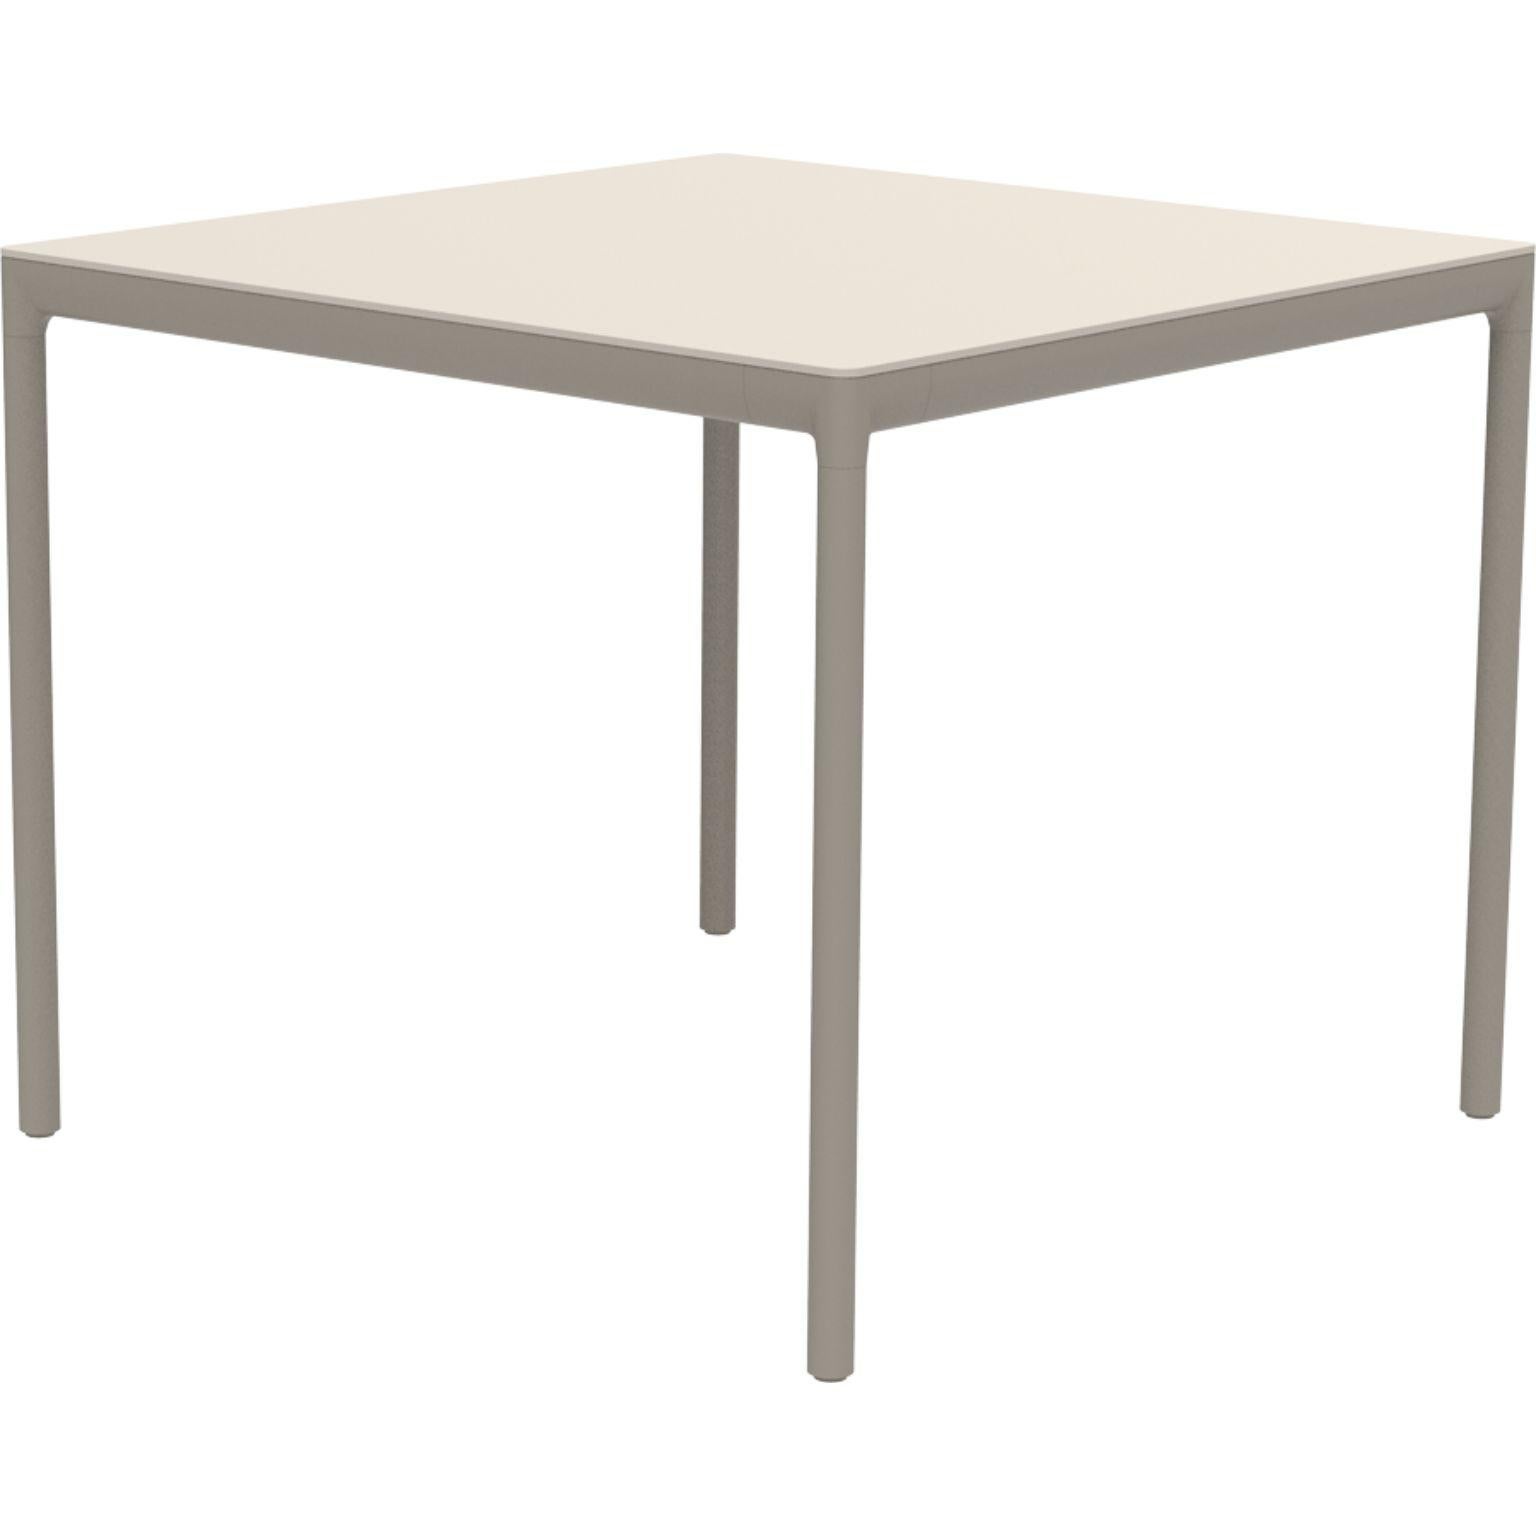 Ribbons cream 90 table by MOWEE
Dimensions: D90 x W90 x H75 cm.
Material: Aluminium and HPL top.
Weight: 16 kg.
Also available in different colors and finishes. (HPL Black Edge or Neolith top).

An unmistakable collection for its beauty and